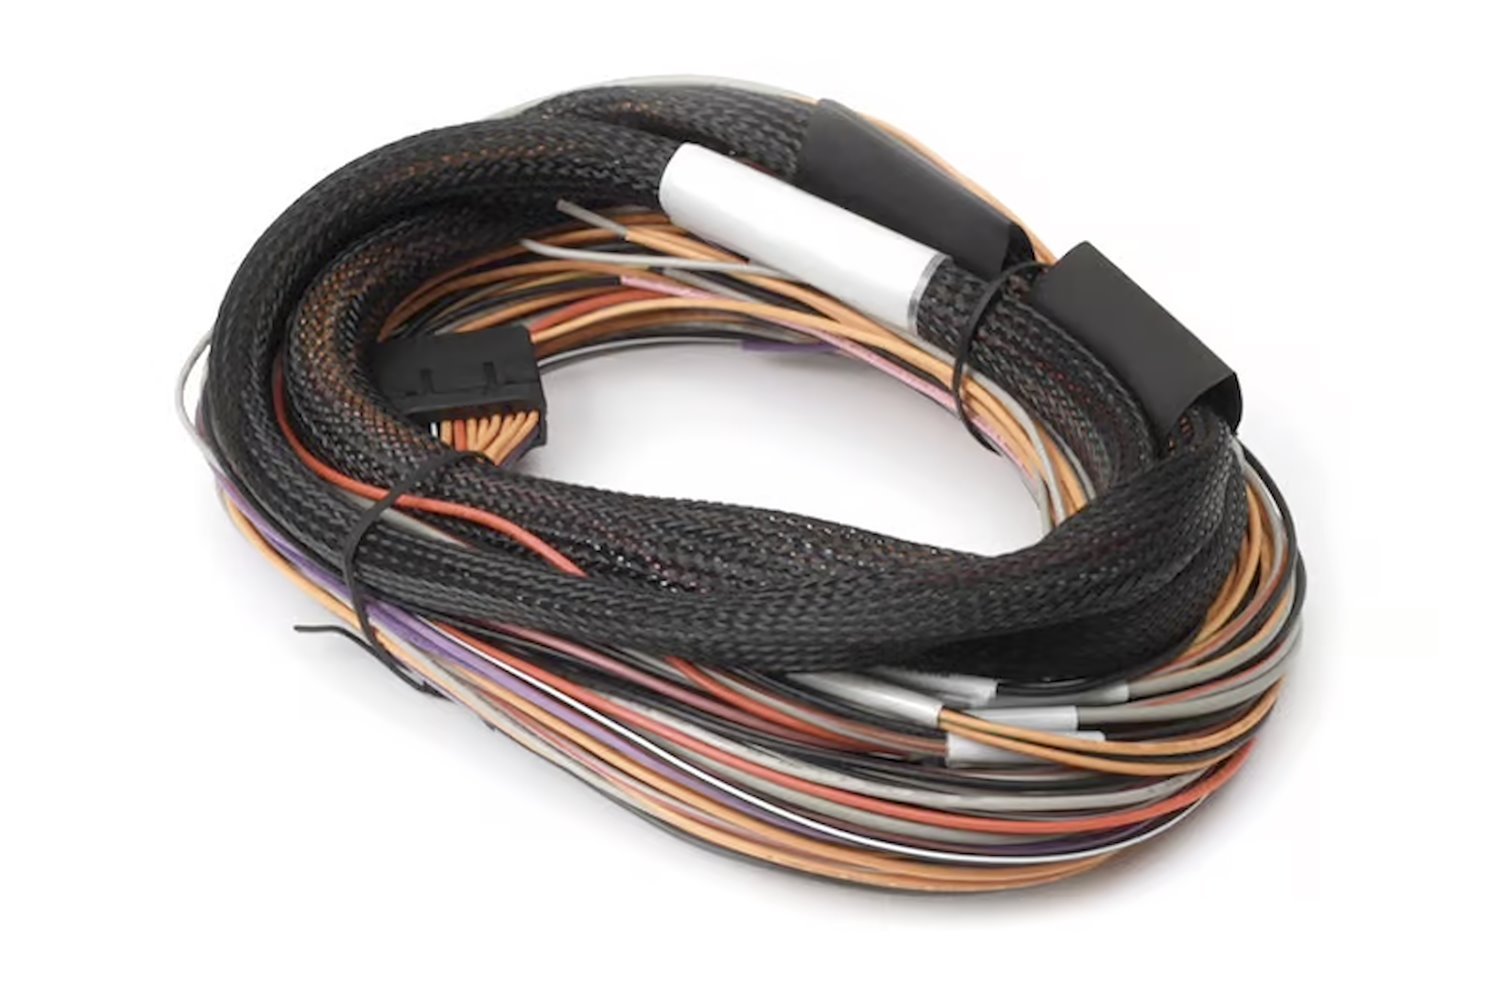 HT-049902 IO 12 Expander Box Flying Lead Harness Only, 2.5m/8 ft.